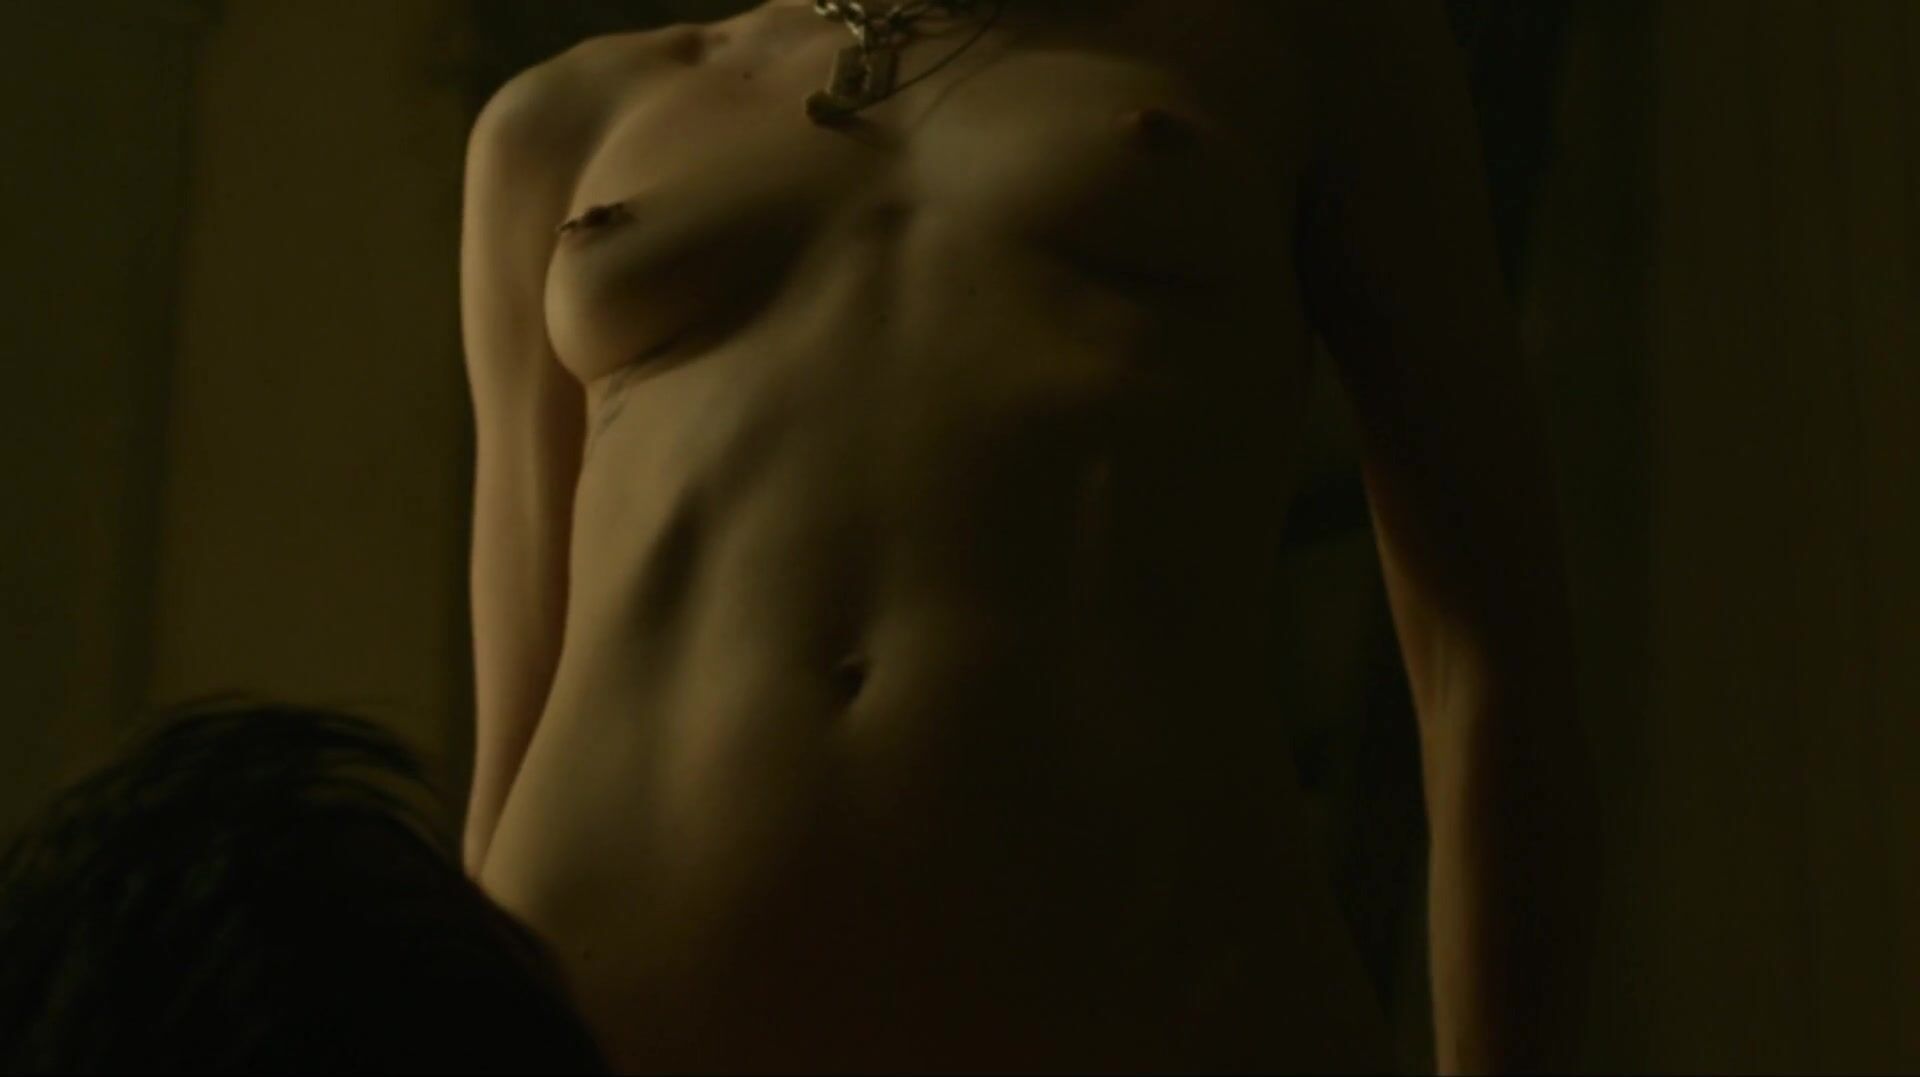 Muscle Men hump Rooney Mara with her consent or without it in Girl With The Dragon Tattoo FapVid